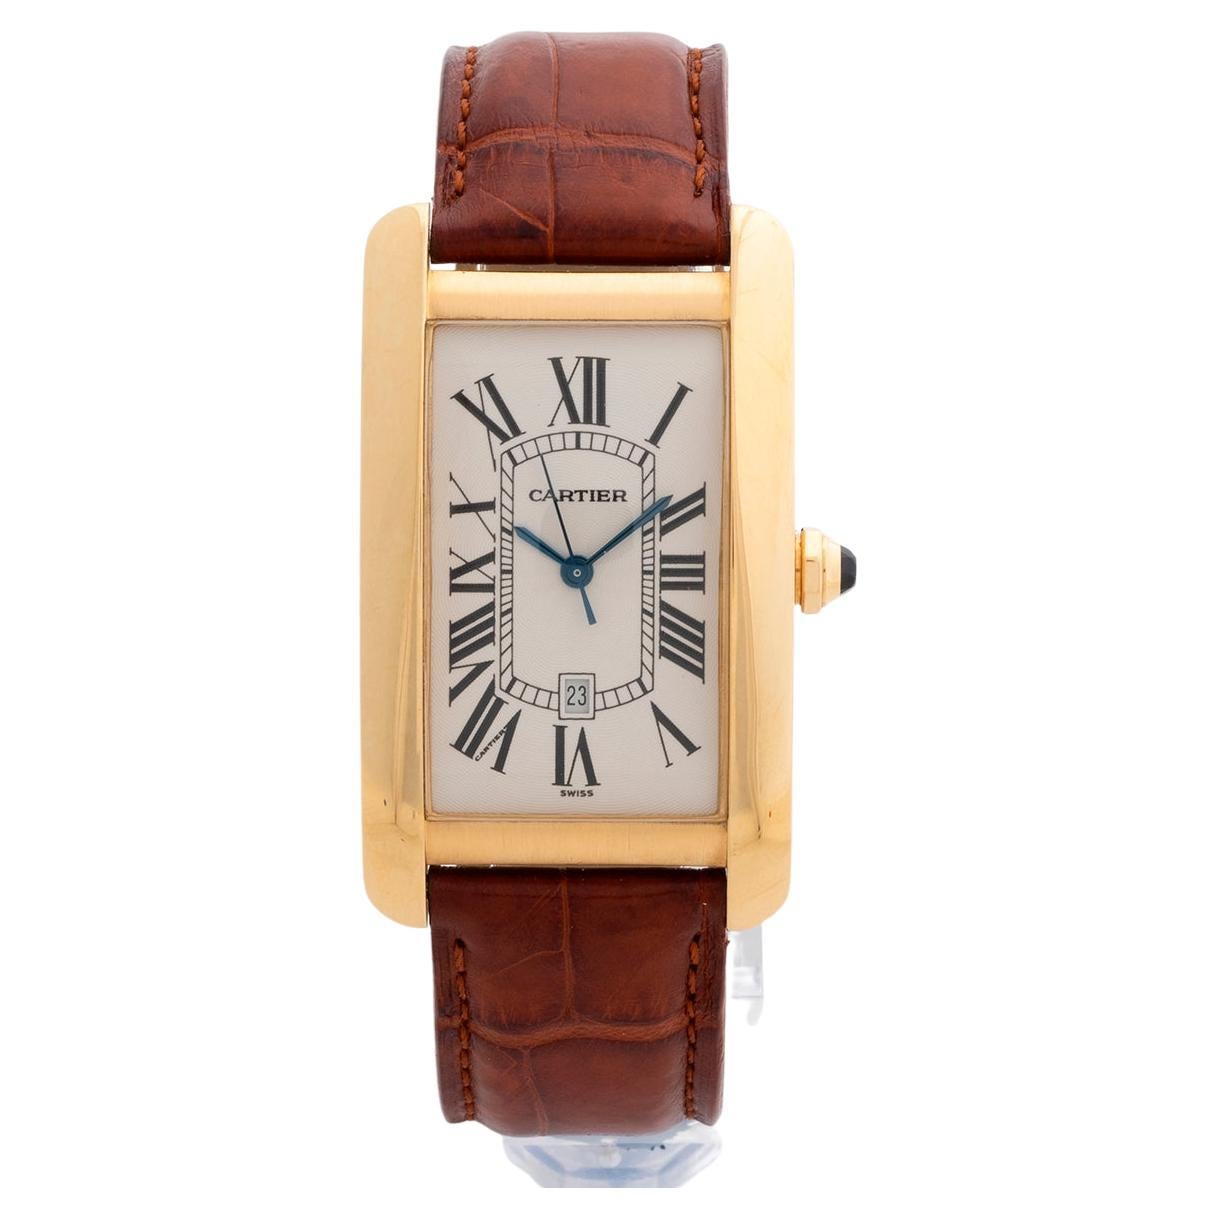 Our rare and near vintage Cartier Tank Americaine with automatic movement, reference 1740, is the XL version with 26mm x 44mm tank case in 18k yellow gold with white dial and its original tan leather strap with 18k yellow gold Cartier tang buckle.